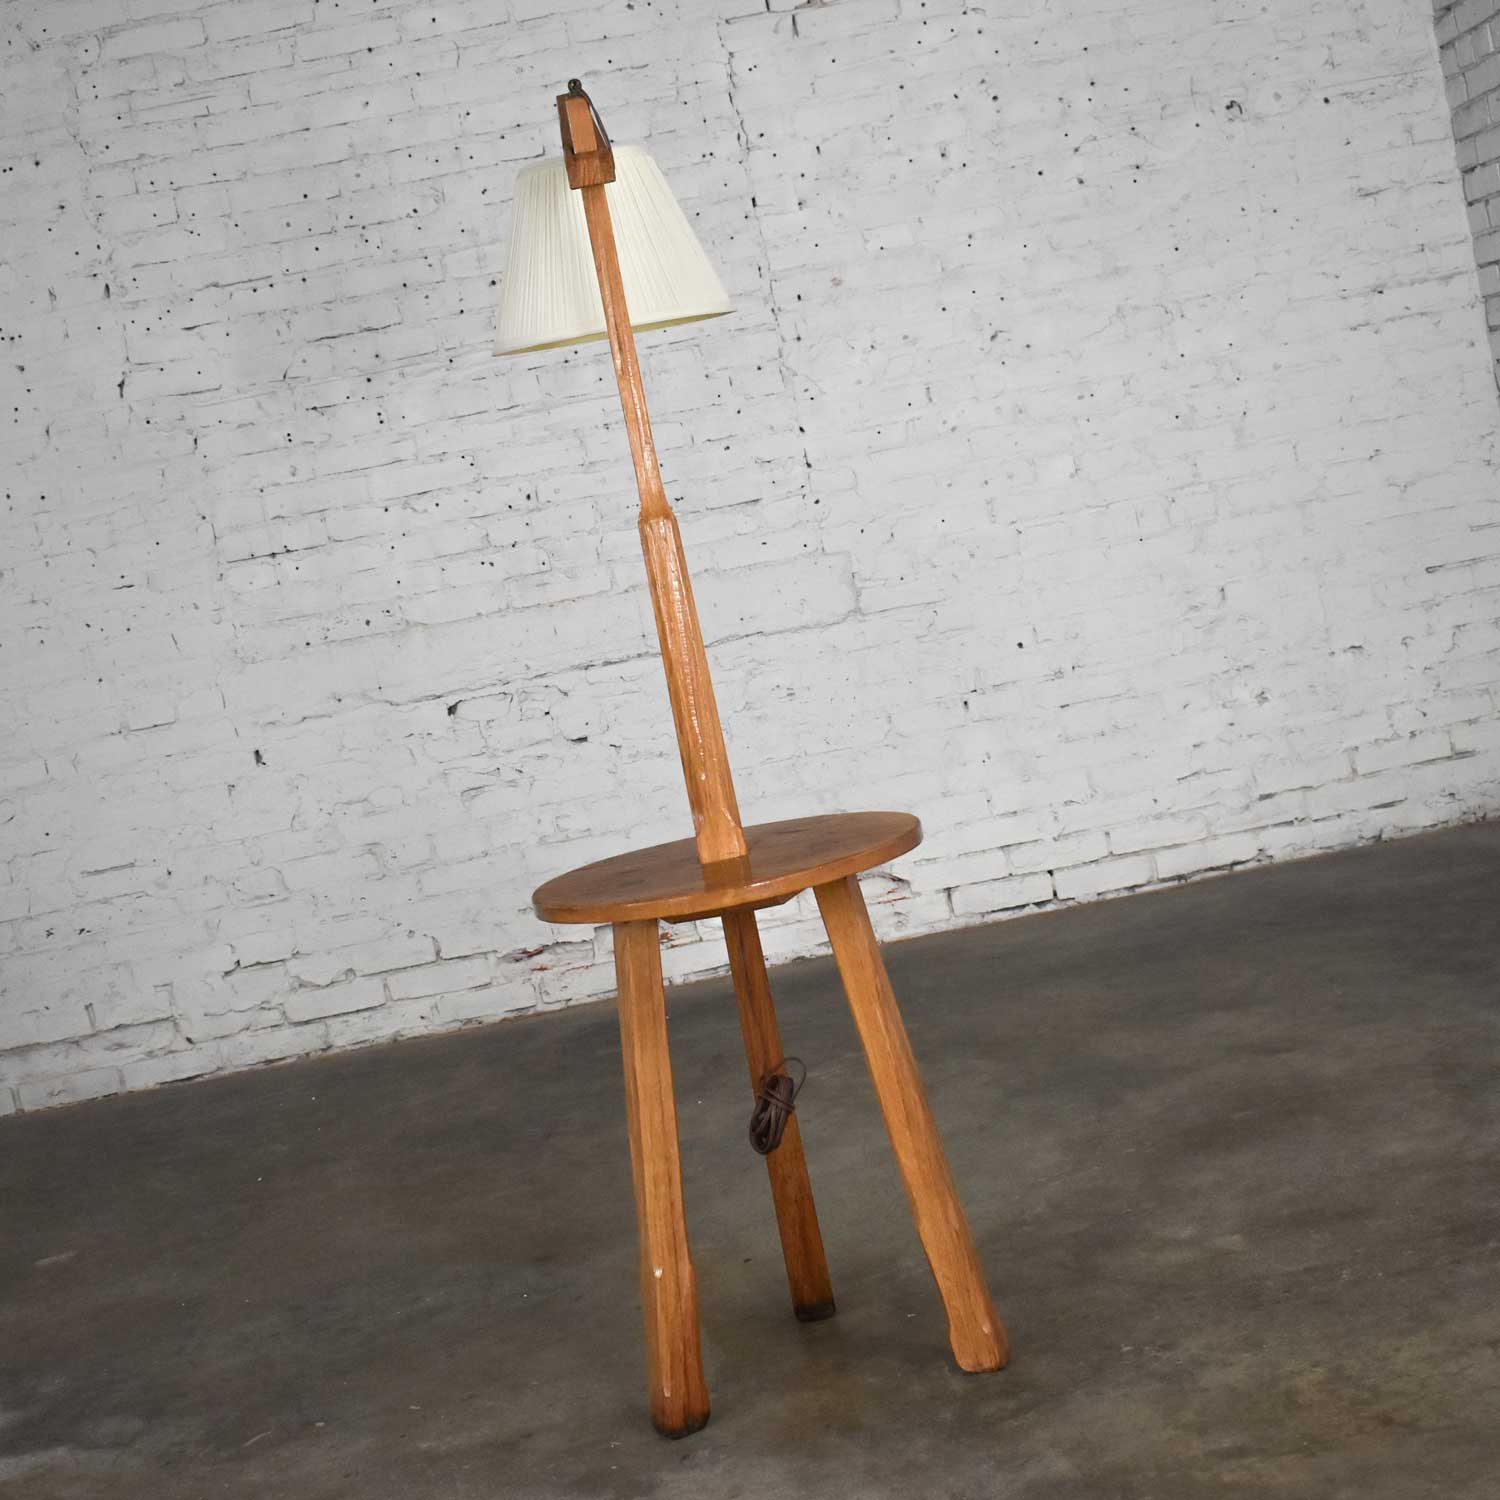 Vintage Ranch Oak Adjustable Arm Floor Lamp Tri Leg Base with Table by A. BrandtVintage Ranch Oak Adjustable Arm Floor Lamp Tri Leg Base with Table by A. Brandt